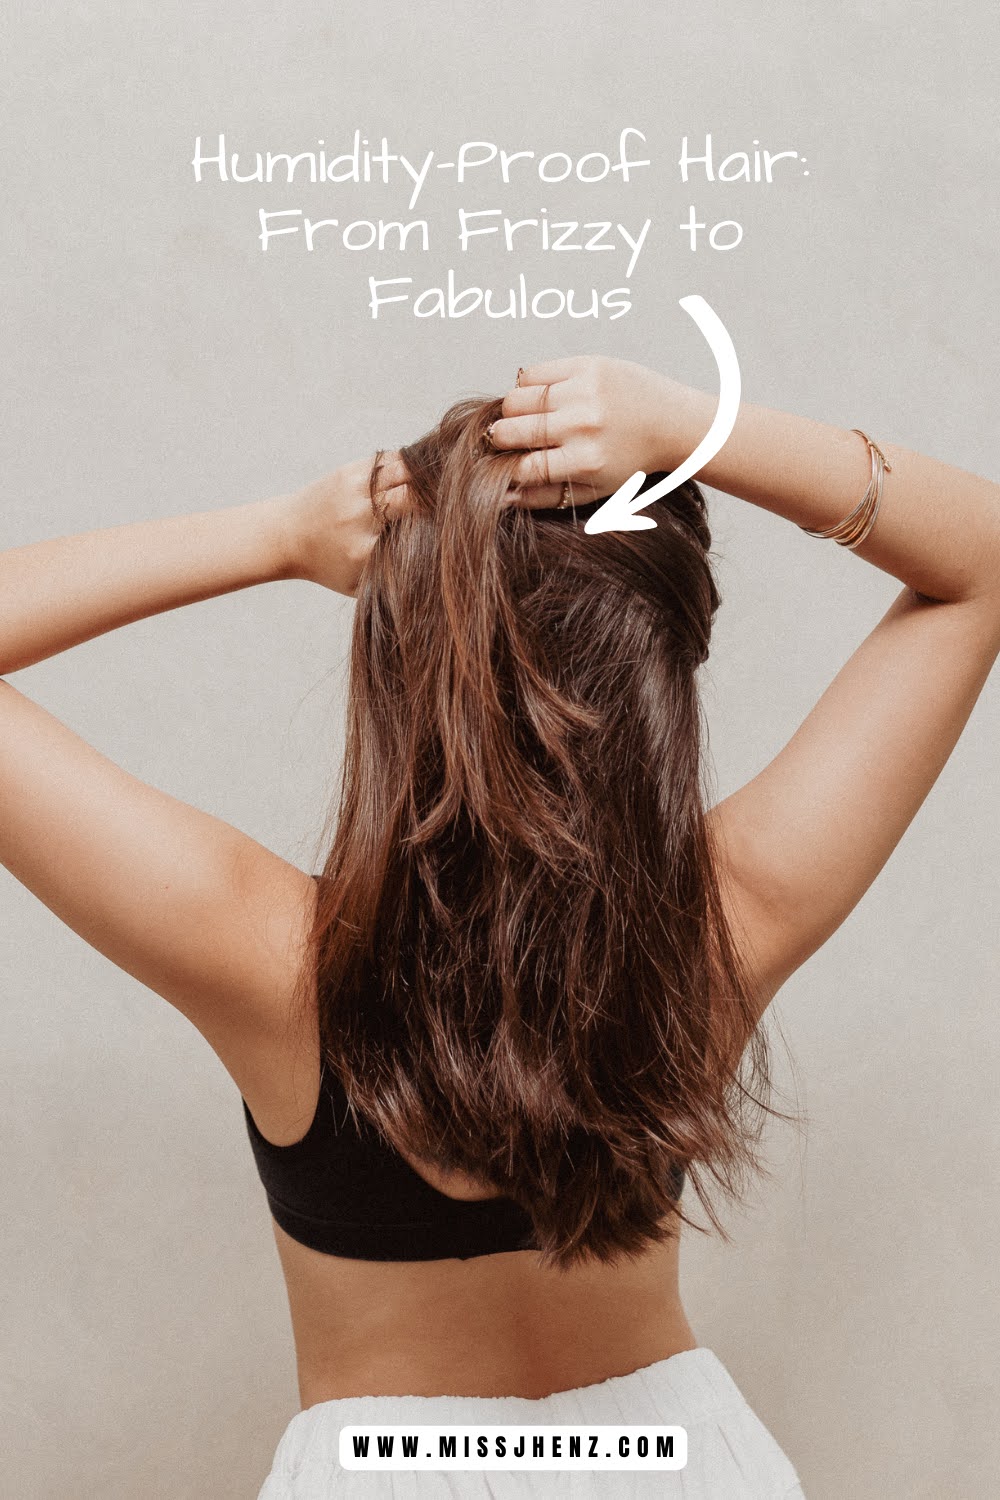 Humidity-Proof Hair: From Frizzy to Fabulous